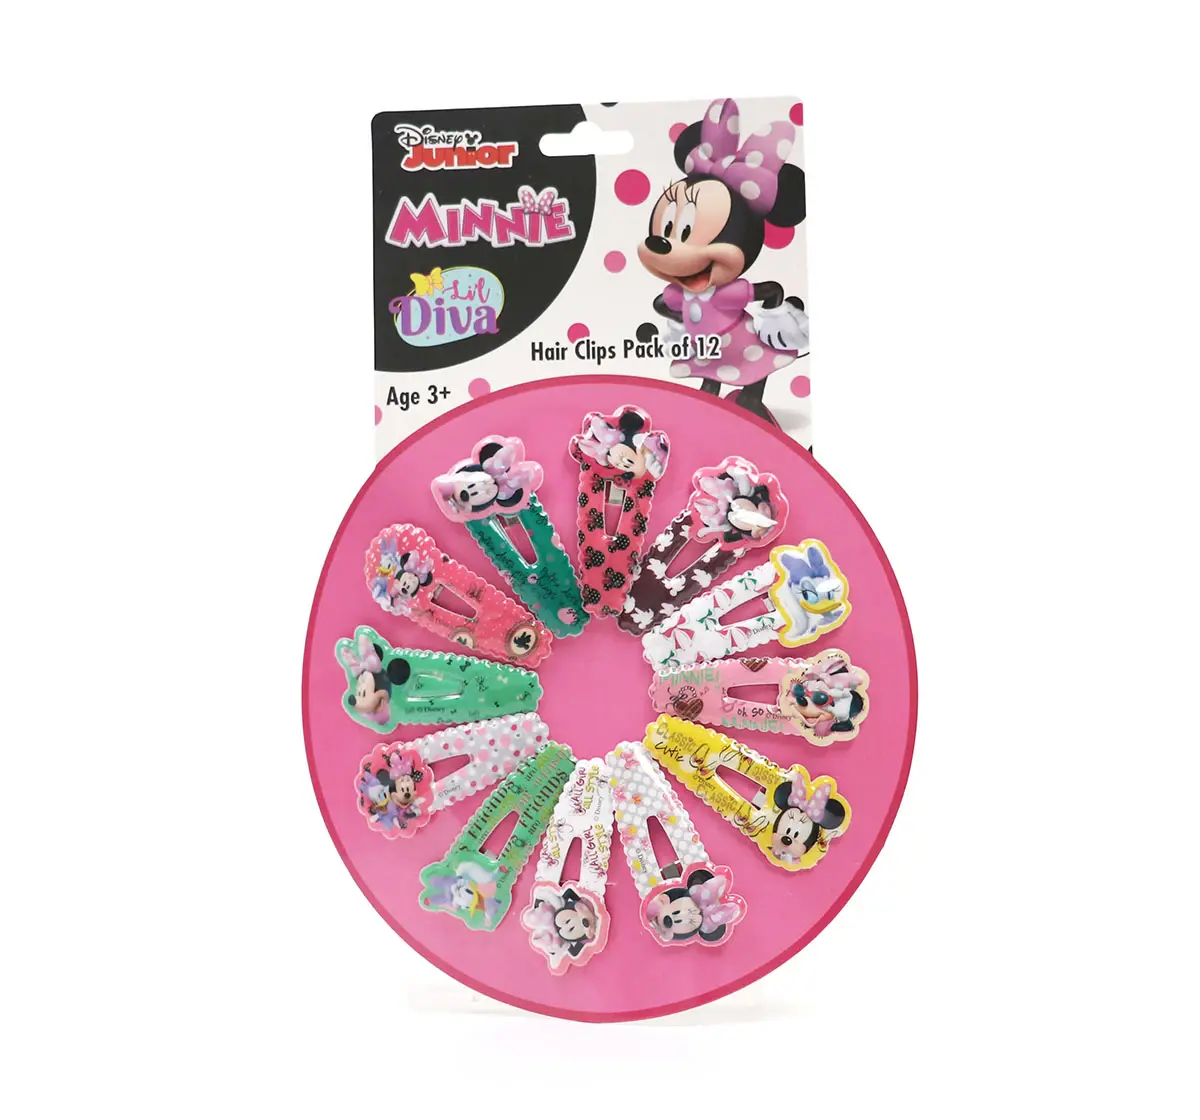 Li'l Diva Minnie Mouse Hair Clips Pack of 12 For Girls Ages 3Y+, Multicolour